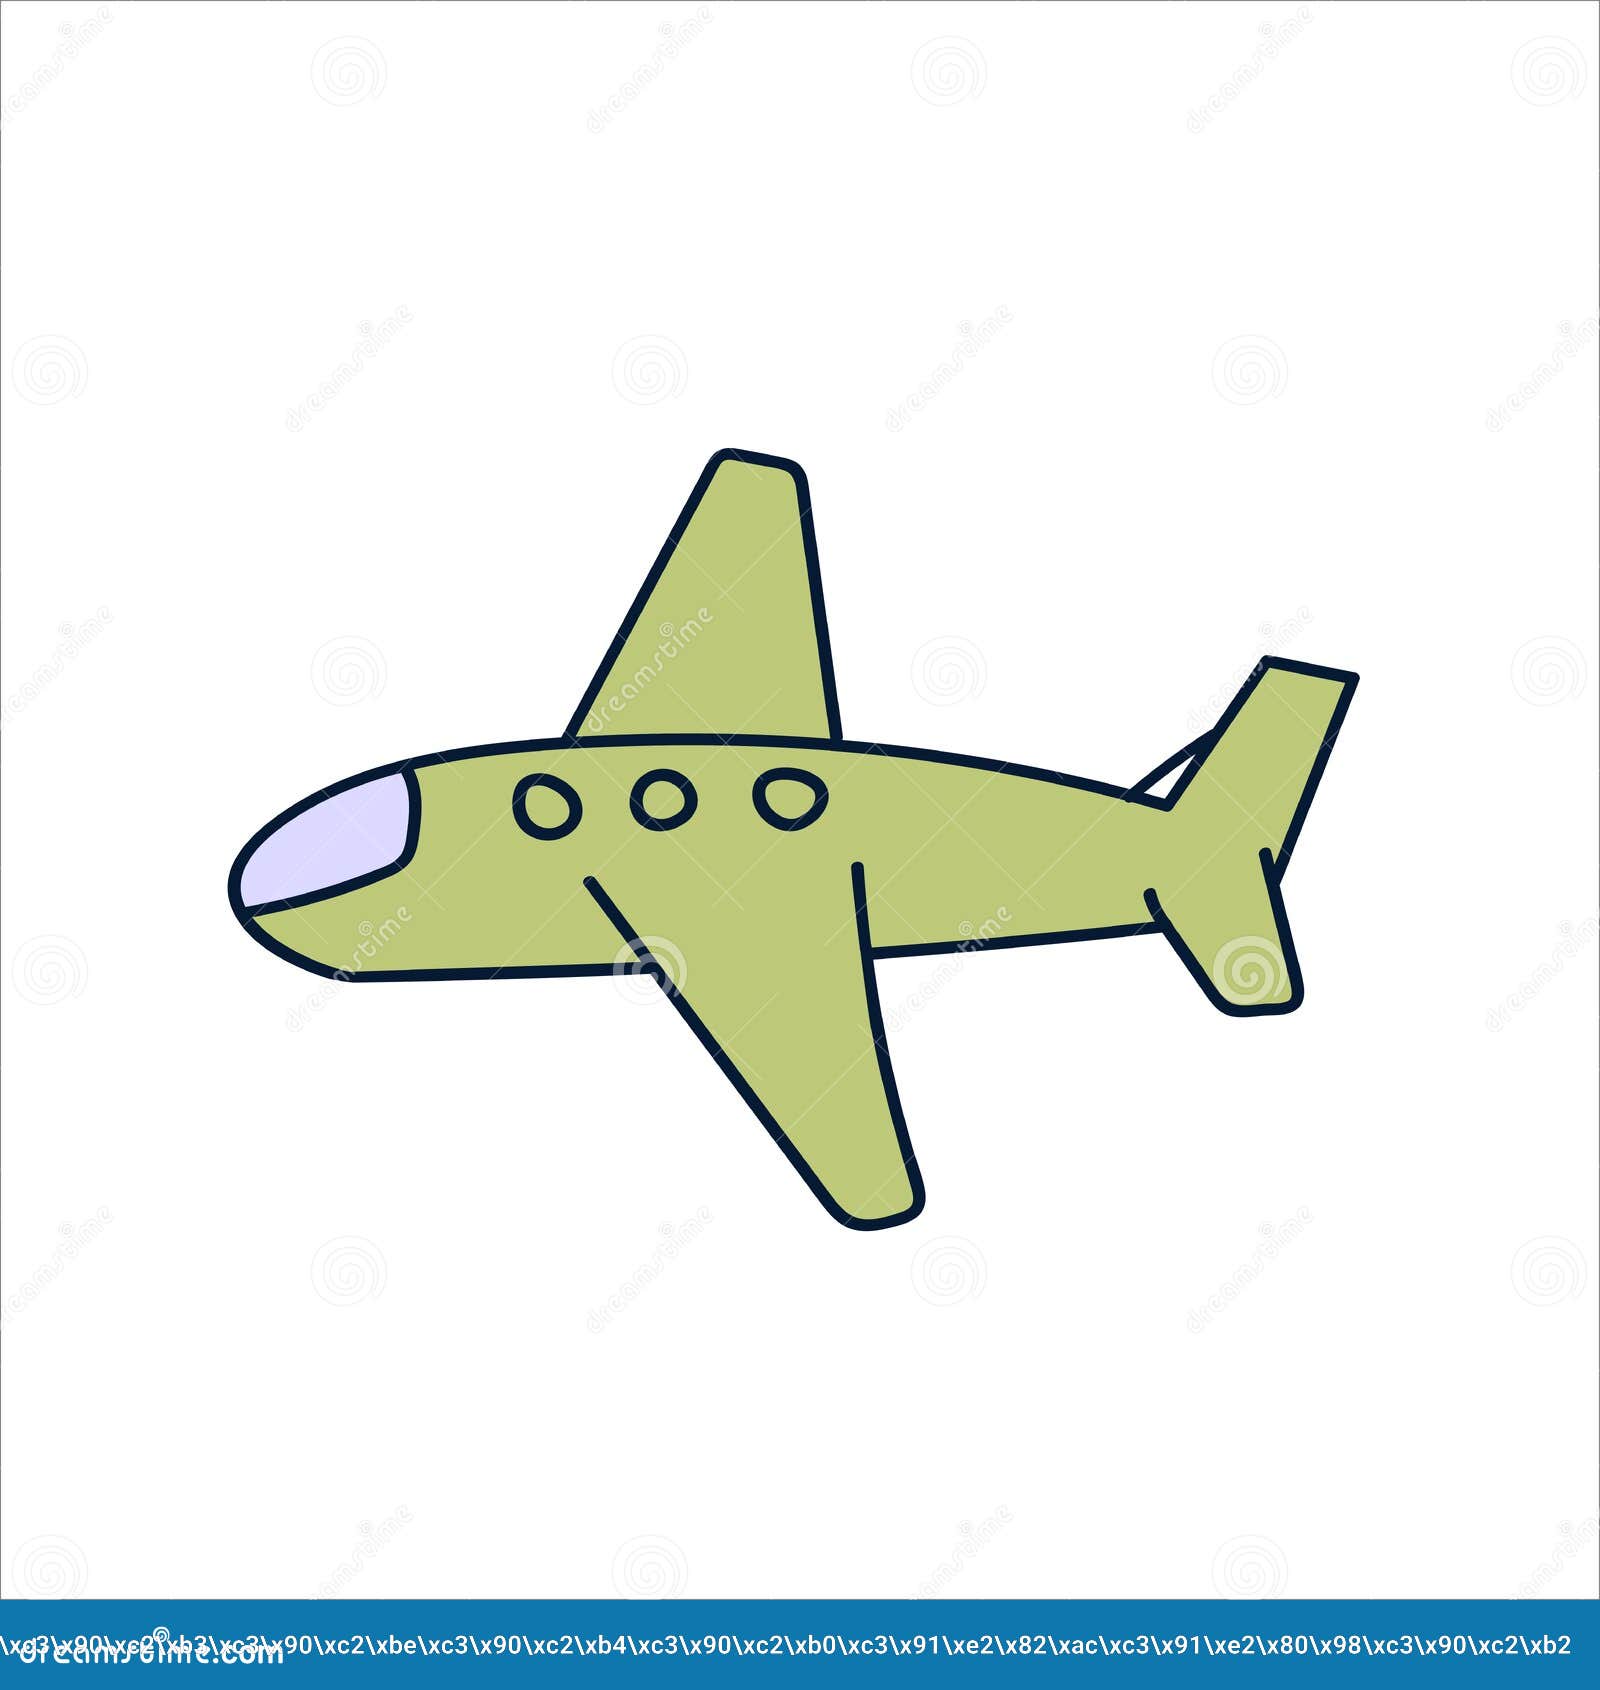 Try this easy Aeroplane ✈️ and a Helicopter🚁 drawing🥳🤓 | Artistic Komal  Try this easy Aeroplane ✈️ and a Helicopter🚁 drawing🥳🤓 . . #draw #drawing  #drawdaily #drawingart #drawdrawdraw #draweveryday... | By Artistic  KomalFacebook